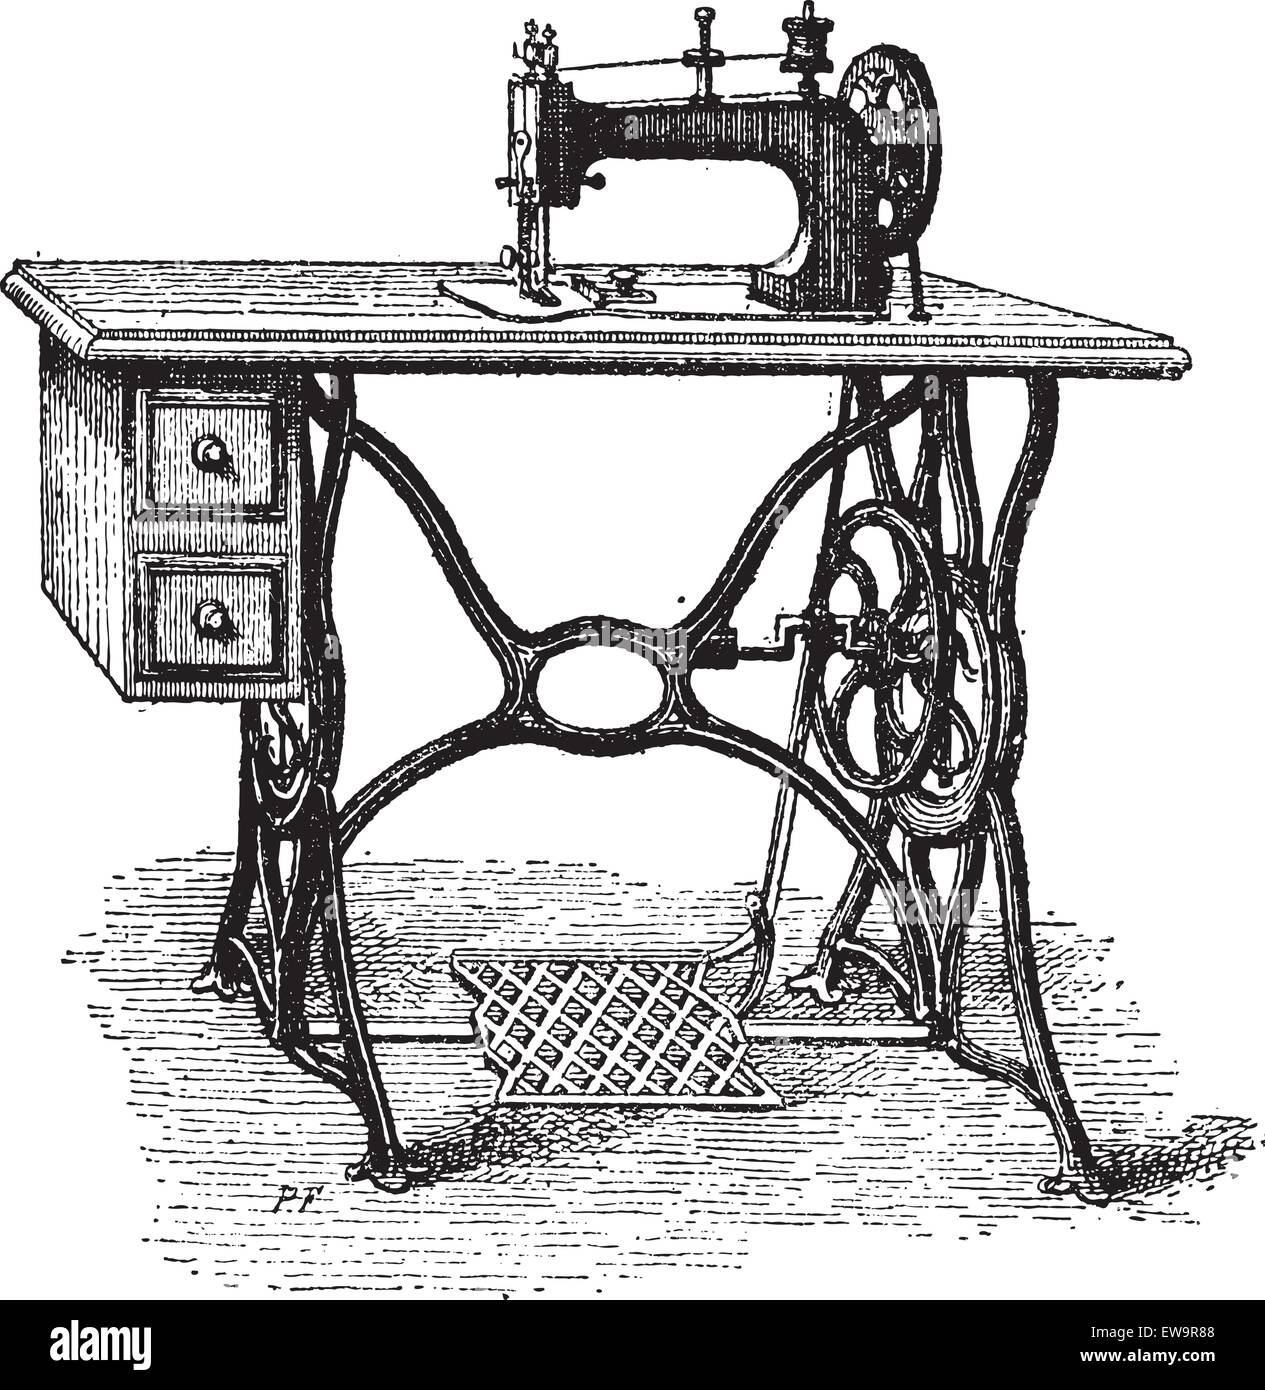 Foot-powered Sewing Machine, vintage engraved illustration. Dictionary of Words and Things - Larive and Fleury - 1895 Stock Vector